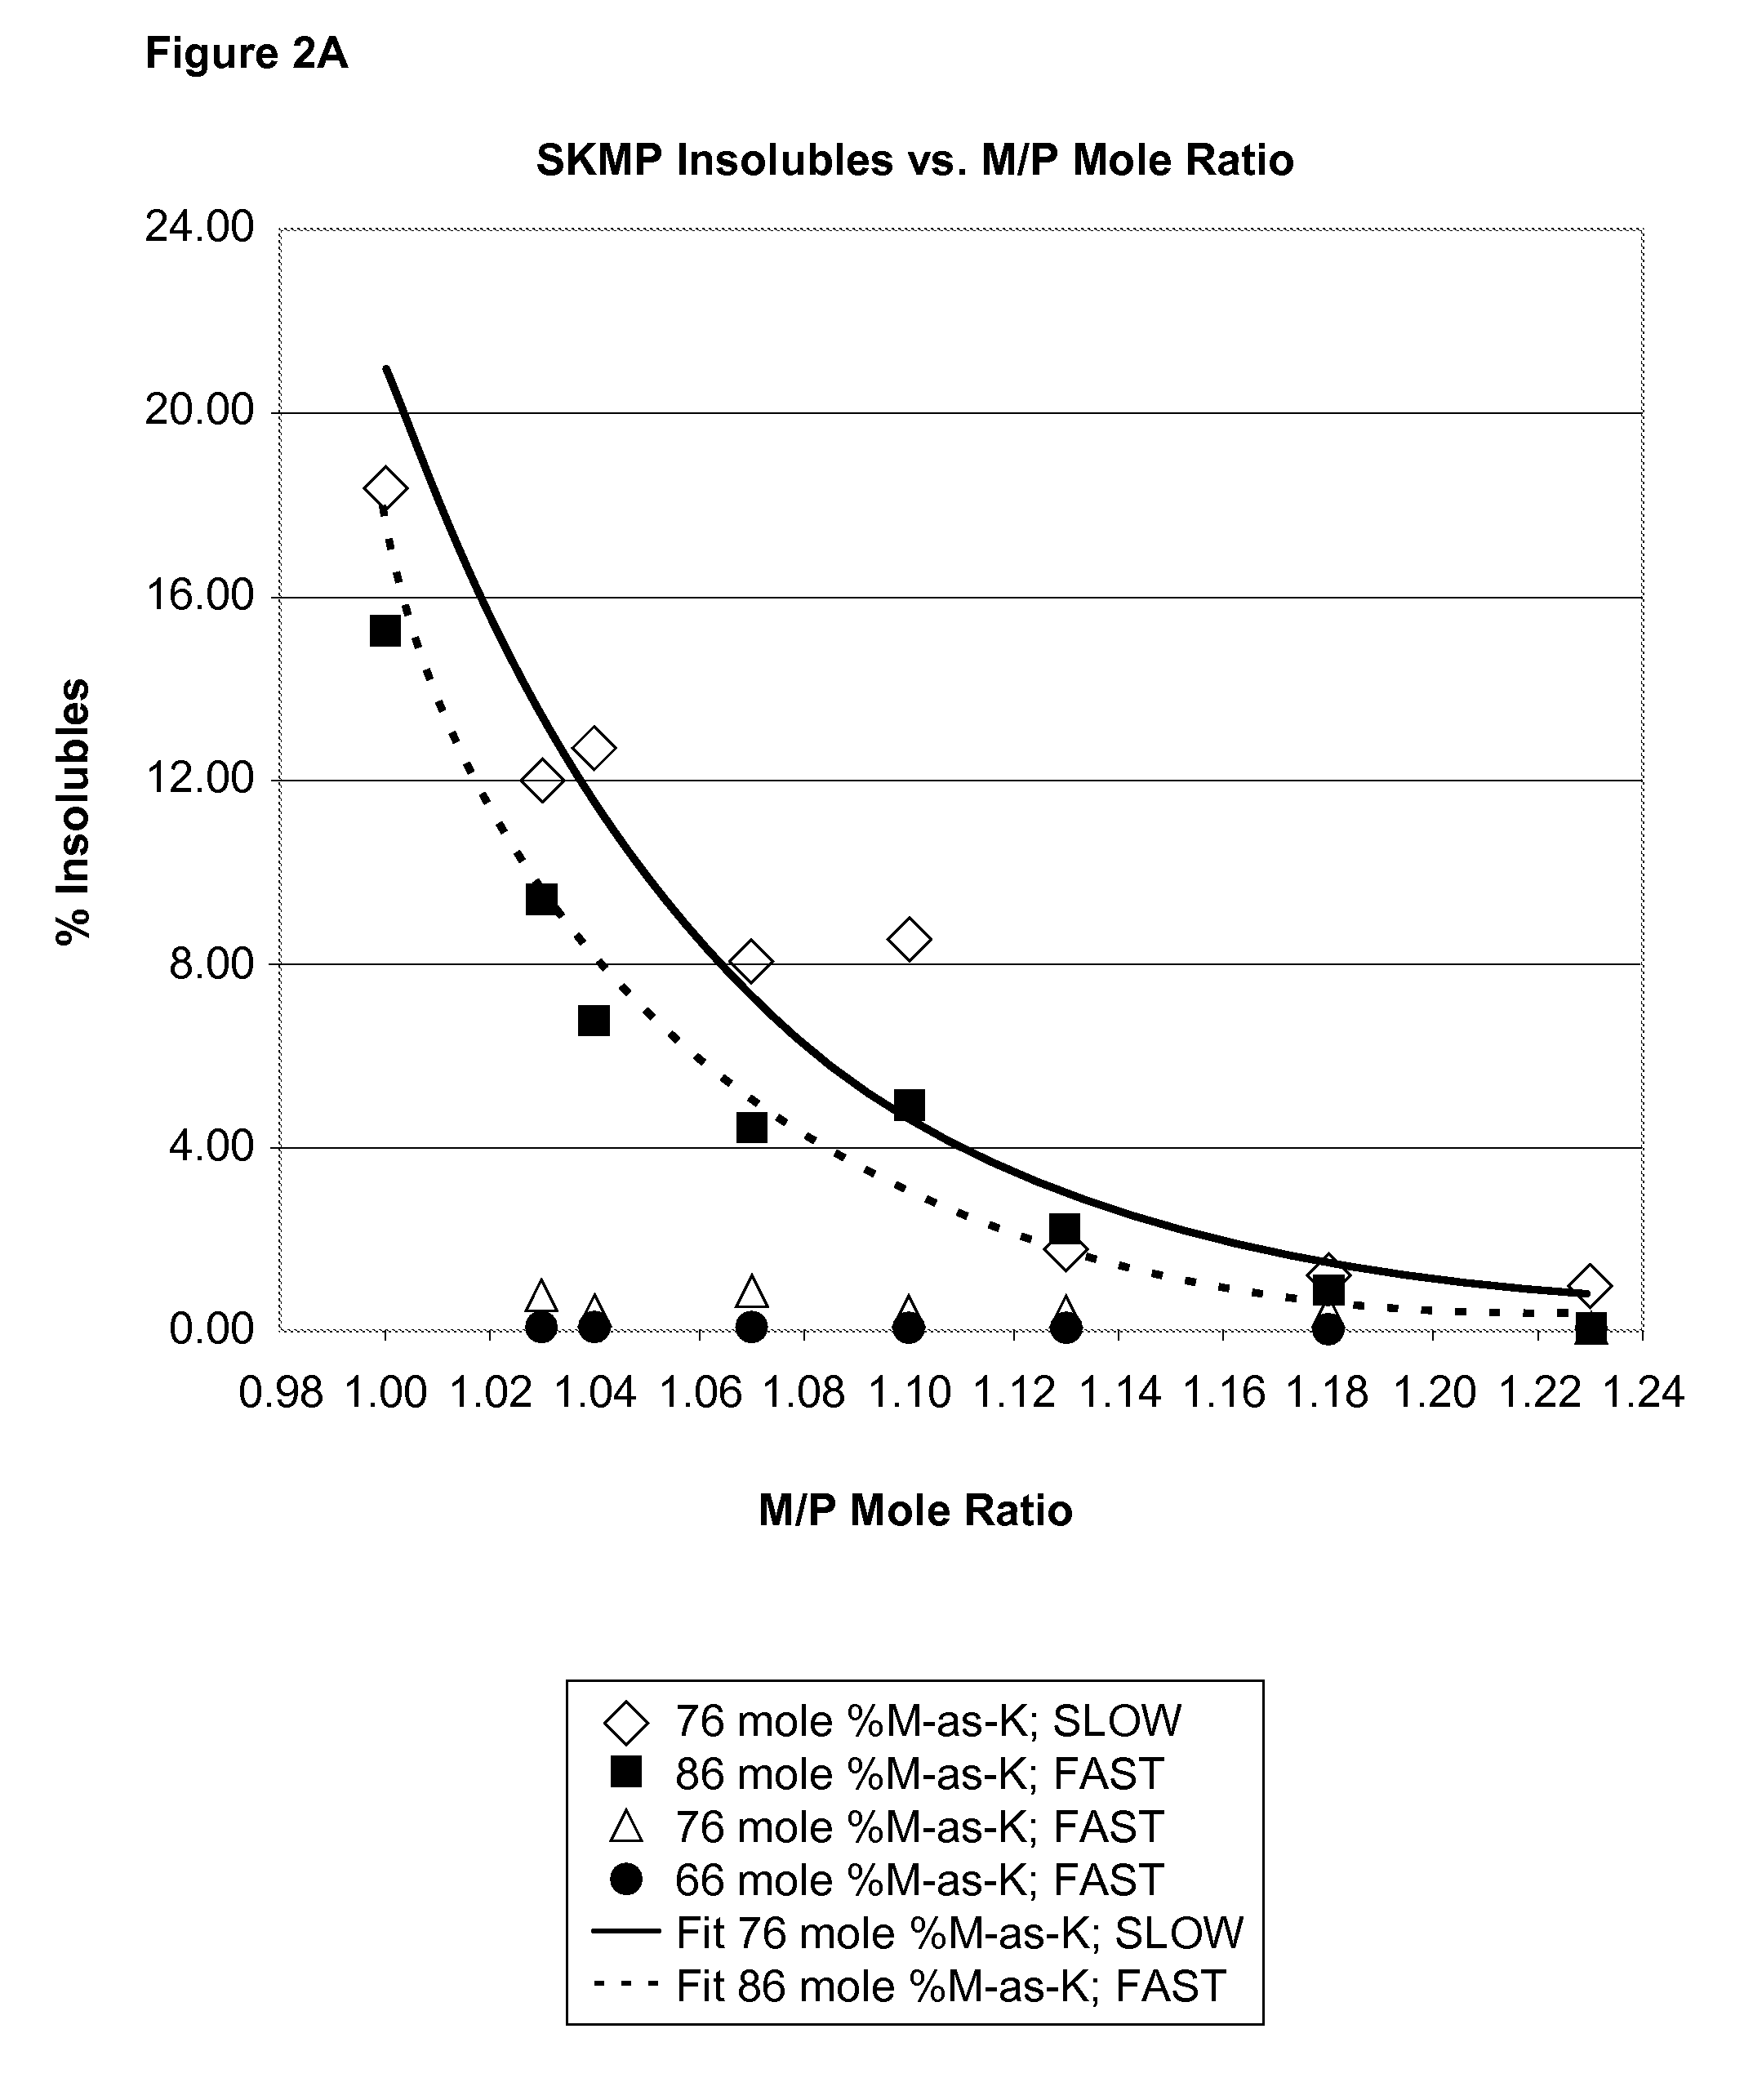 Sodium-Potassium Hexametaphosphate and Potassium Metaphosphate with a Low Insolubles Content